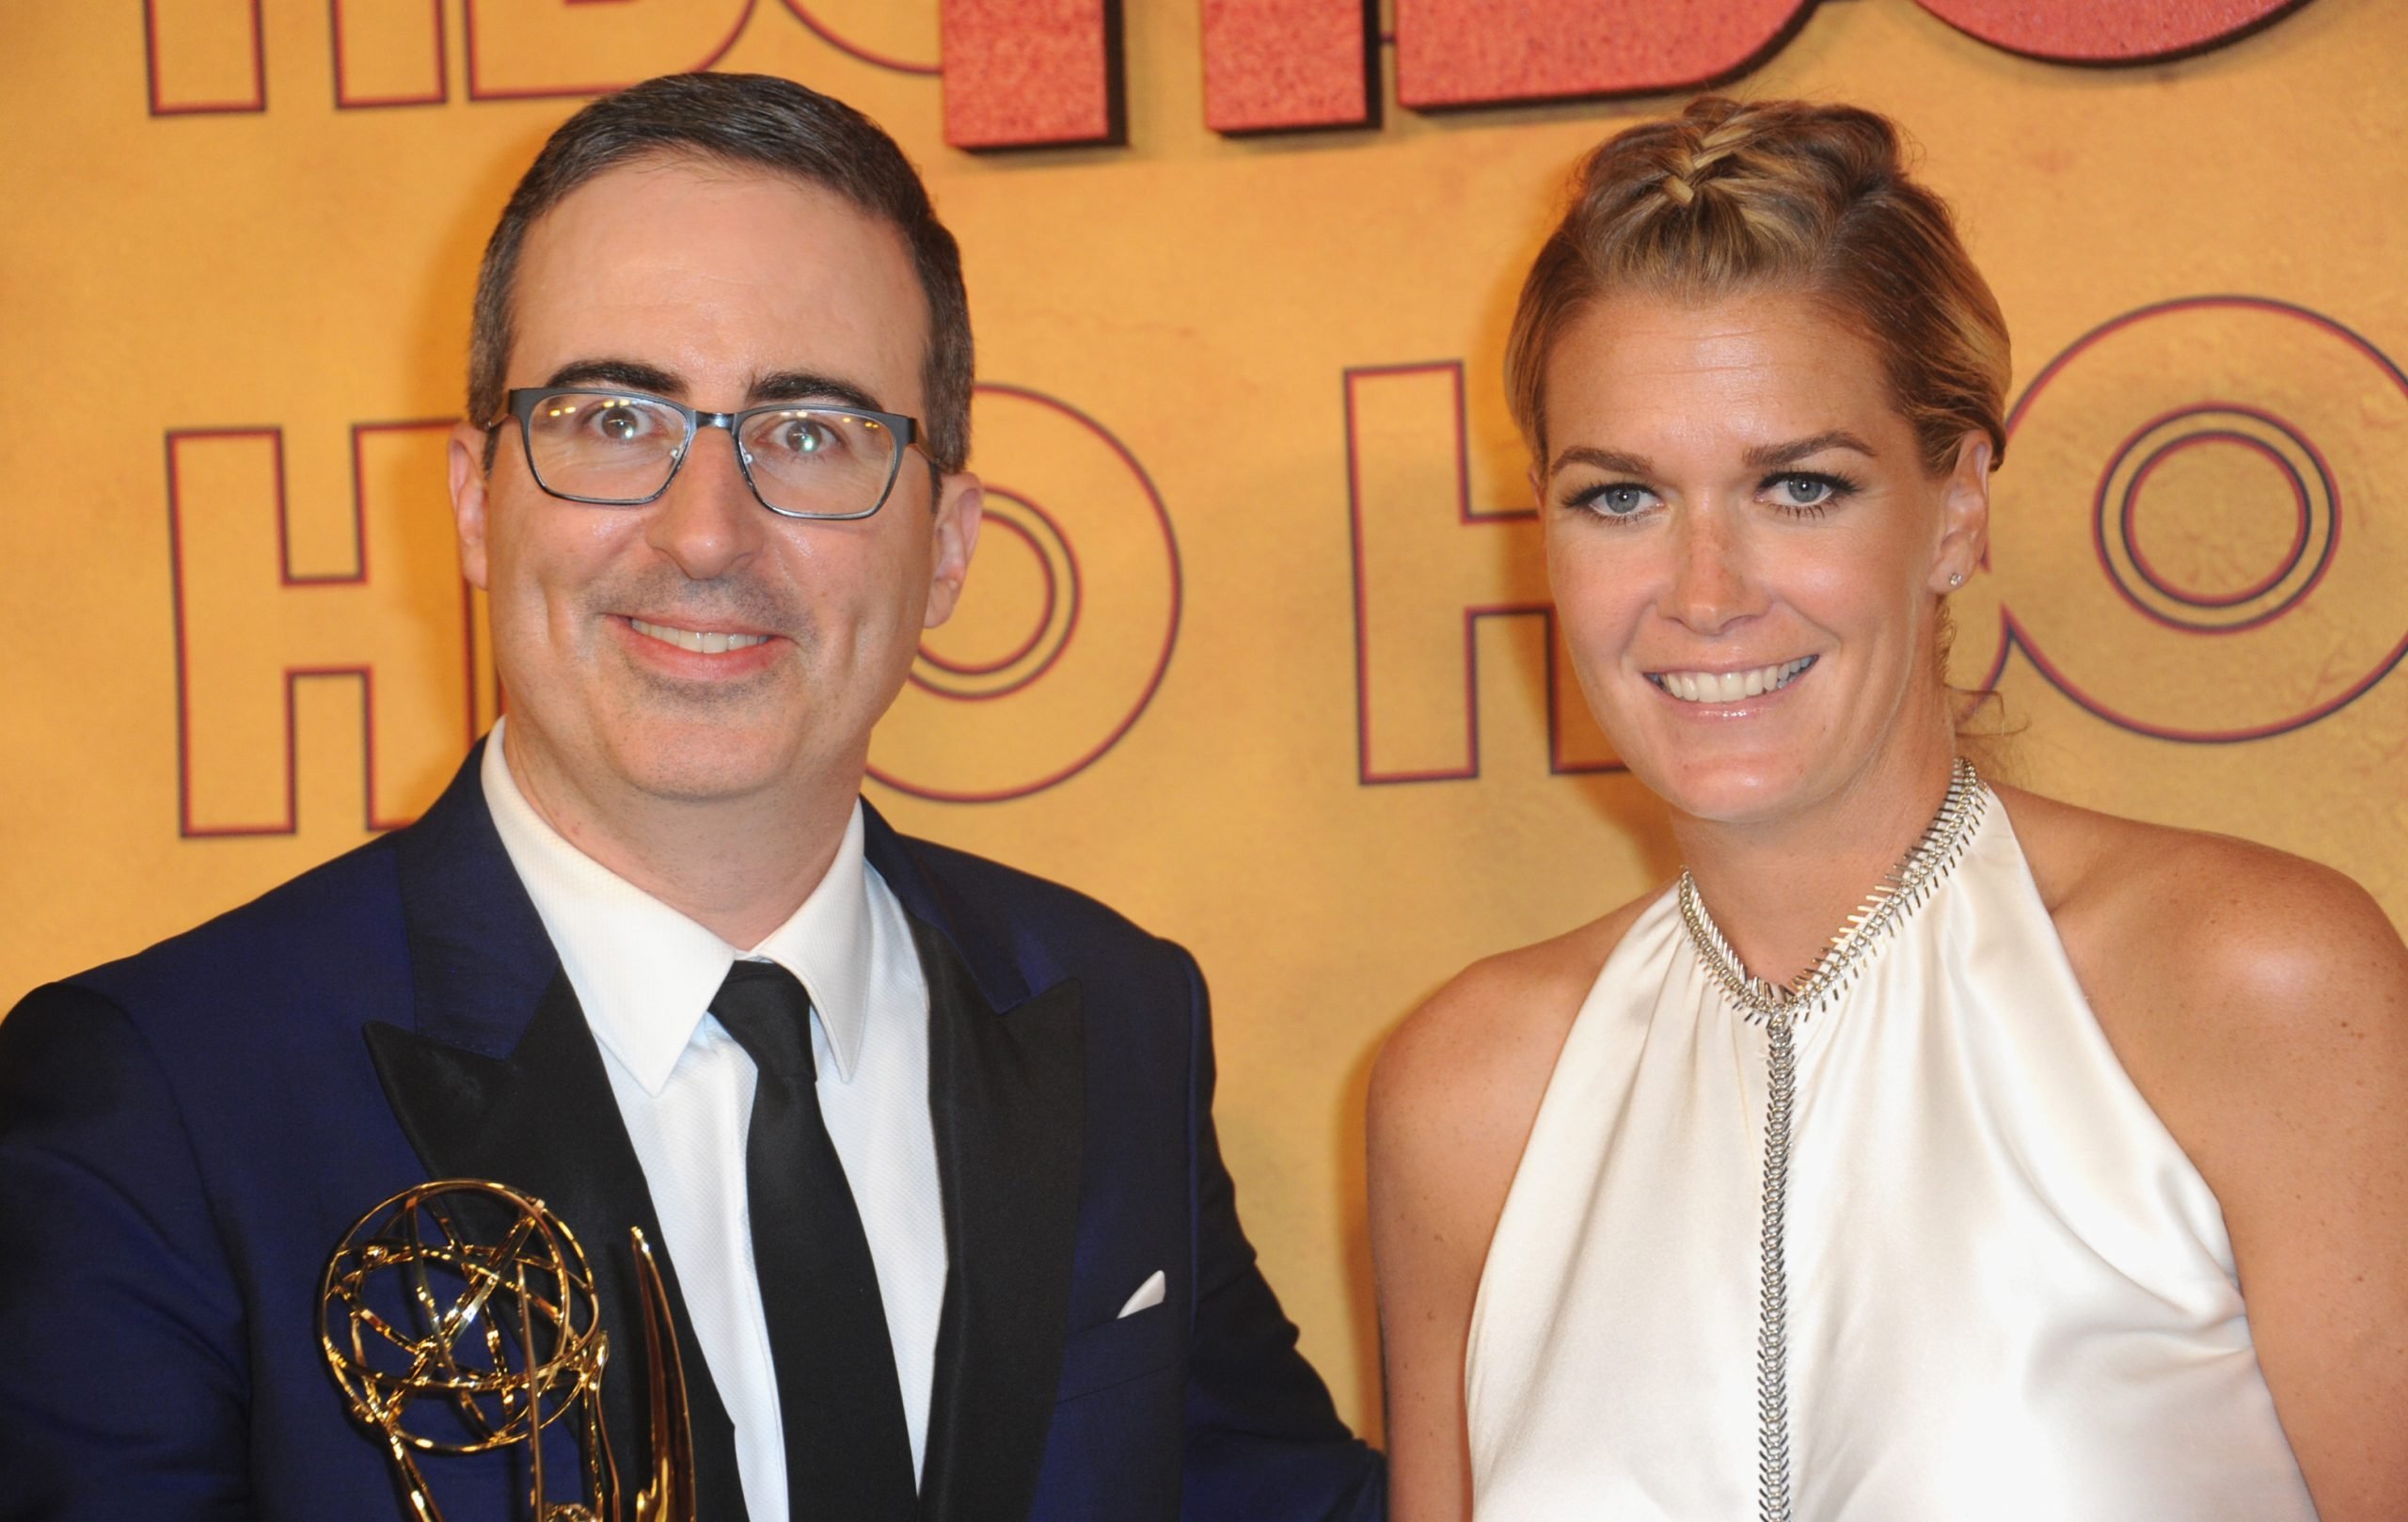 Talk show host John Oliver and wife Kate Norley arrive for the reception of the HBO Post Emmy Awards at The Plaza at the Pacific Design Center on September 17, 2017 in Los Angeles, California.,